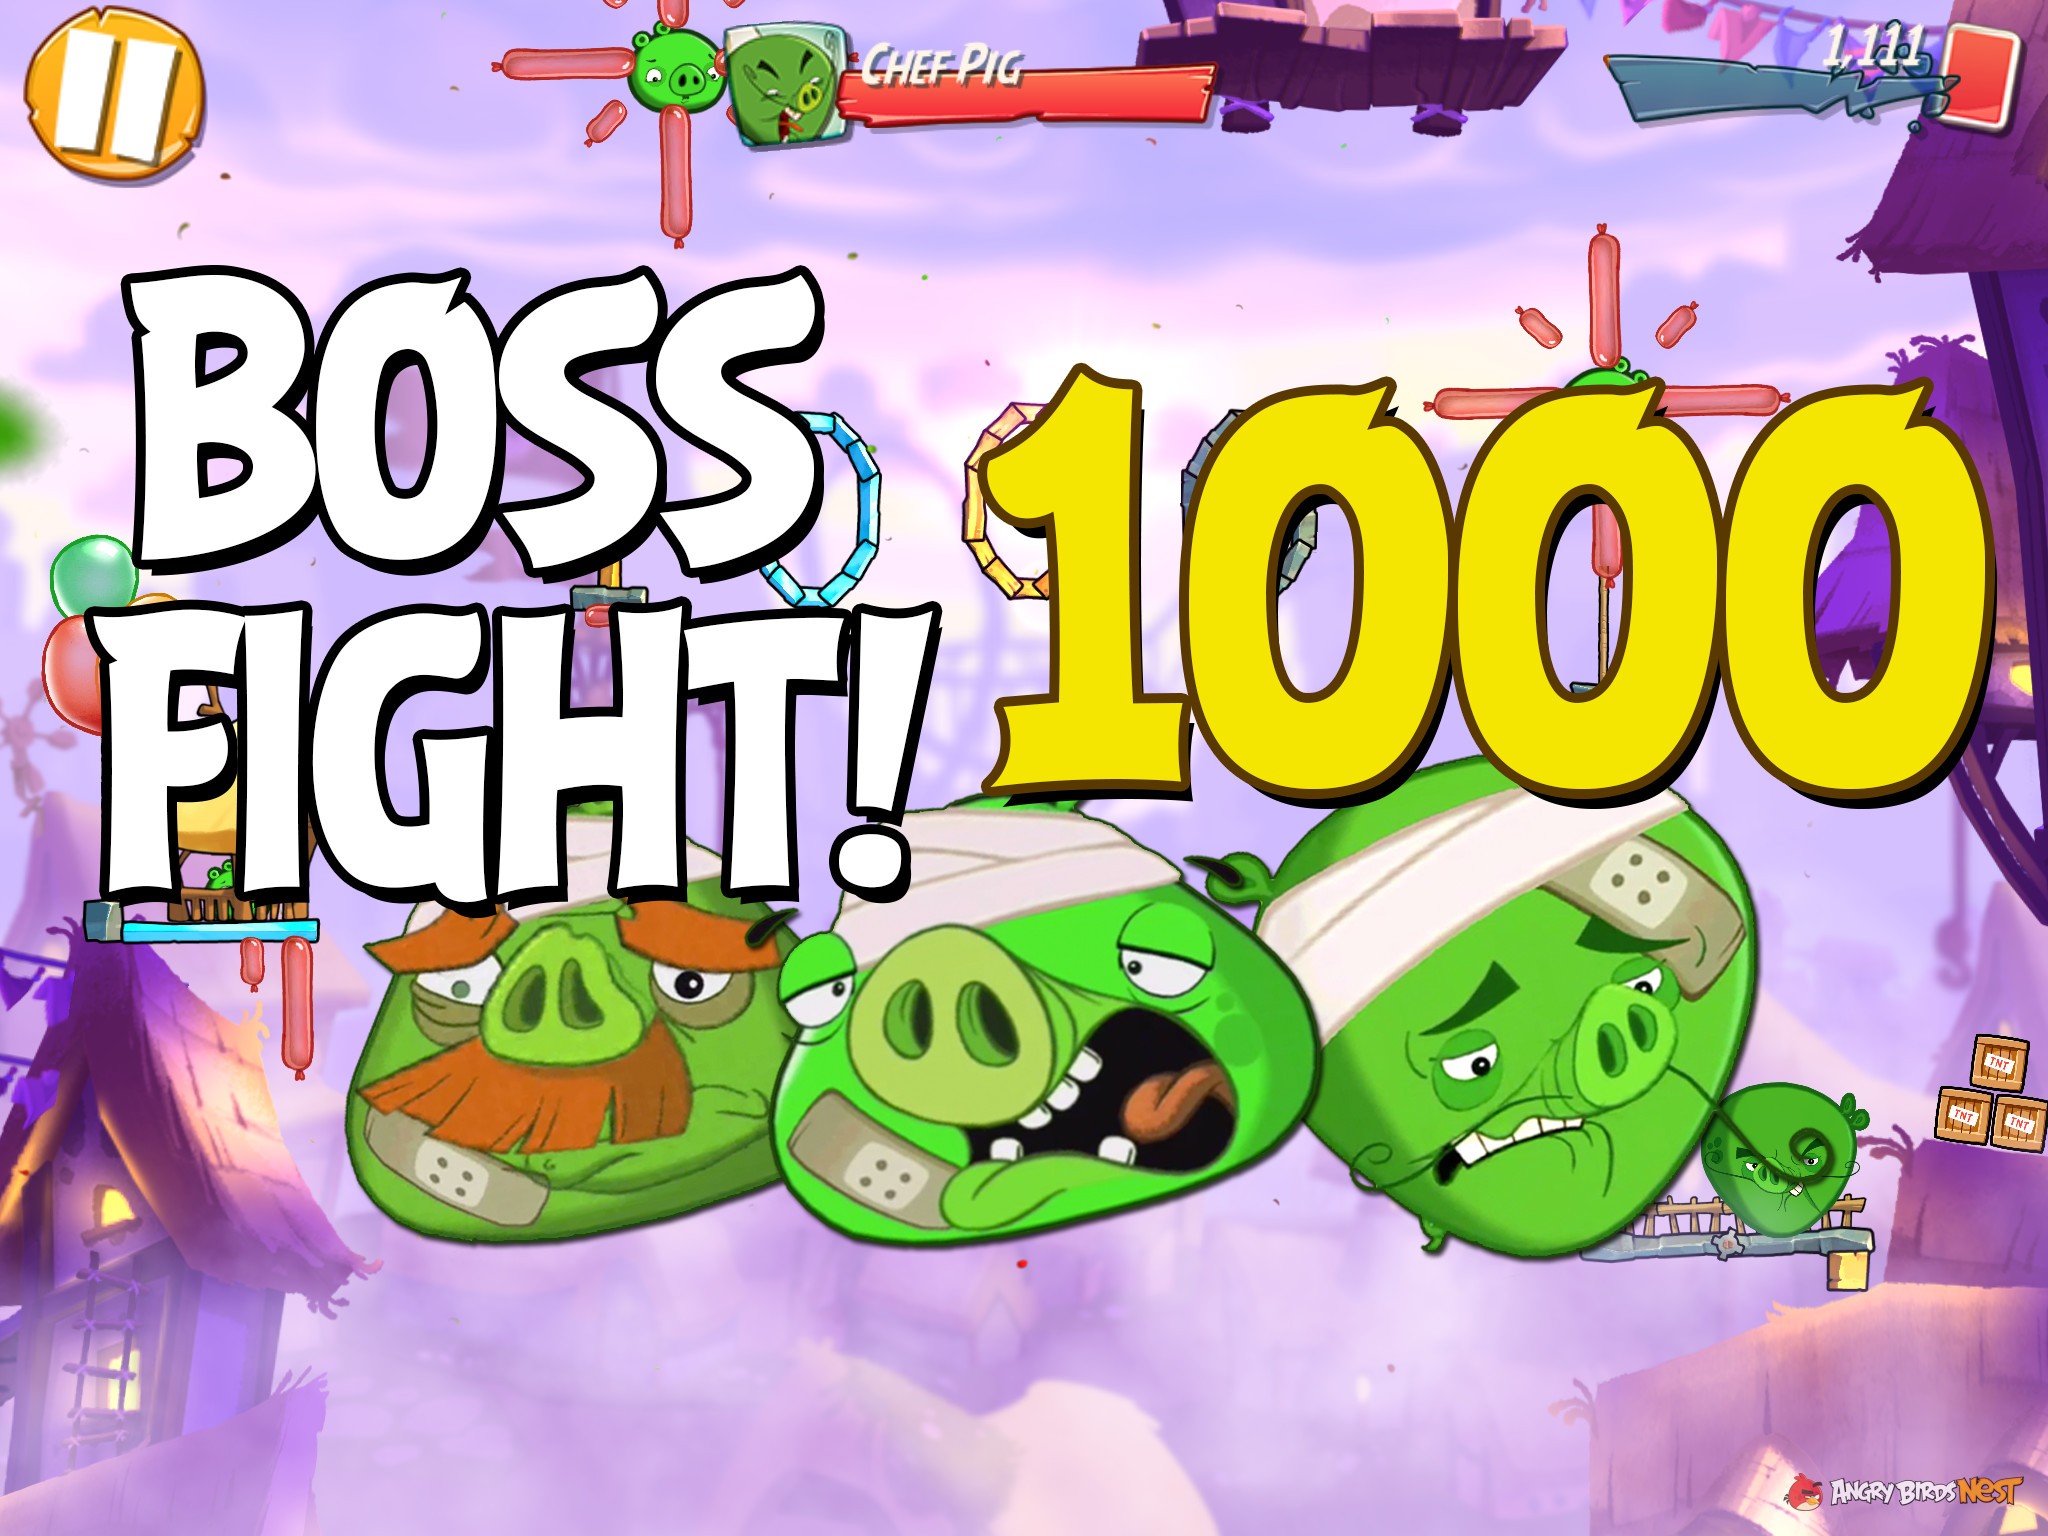 Angry Birds 2 Boss Fight Level 1000